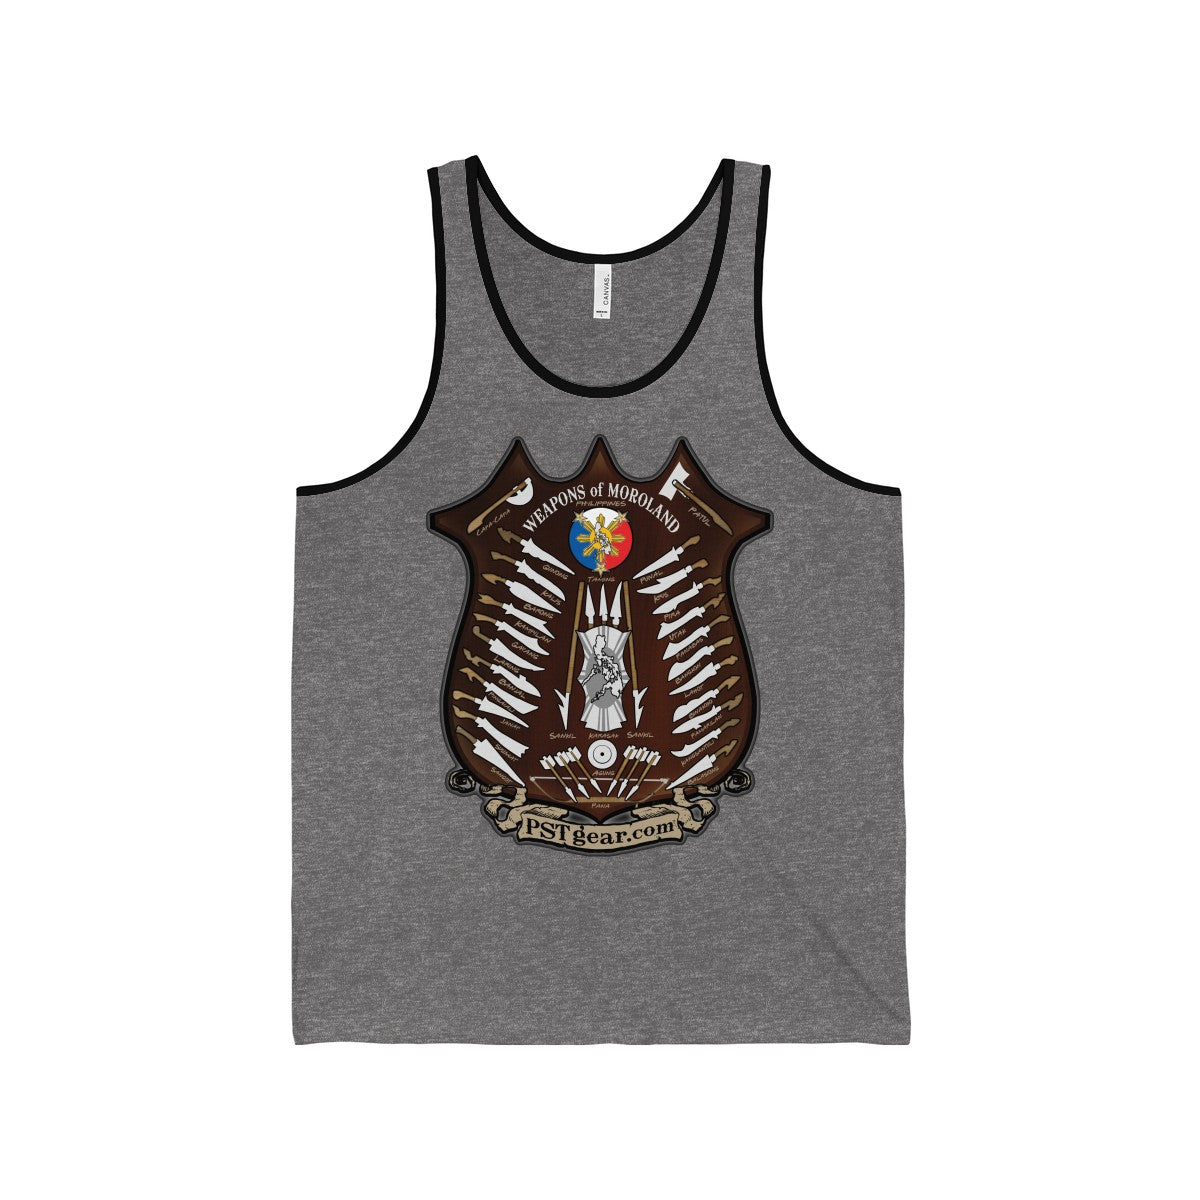 Weapons of Moroland Tank Top